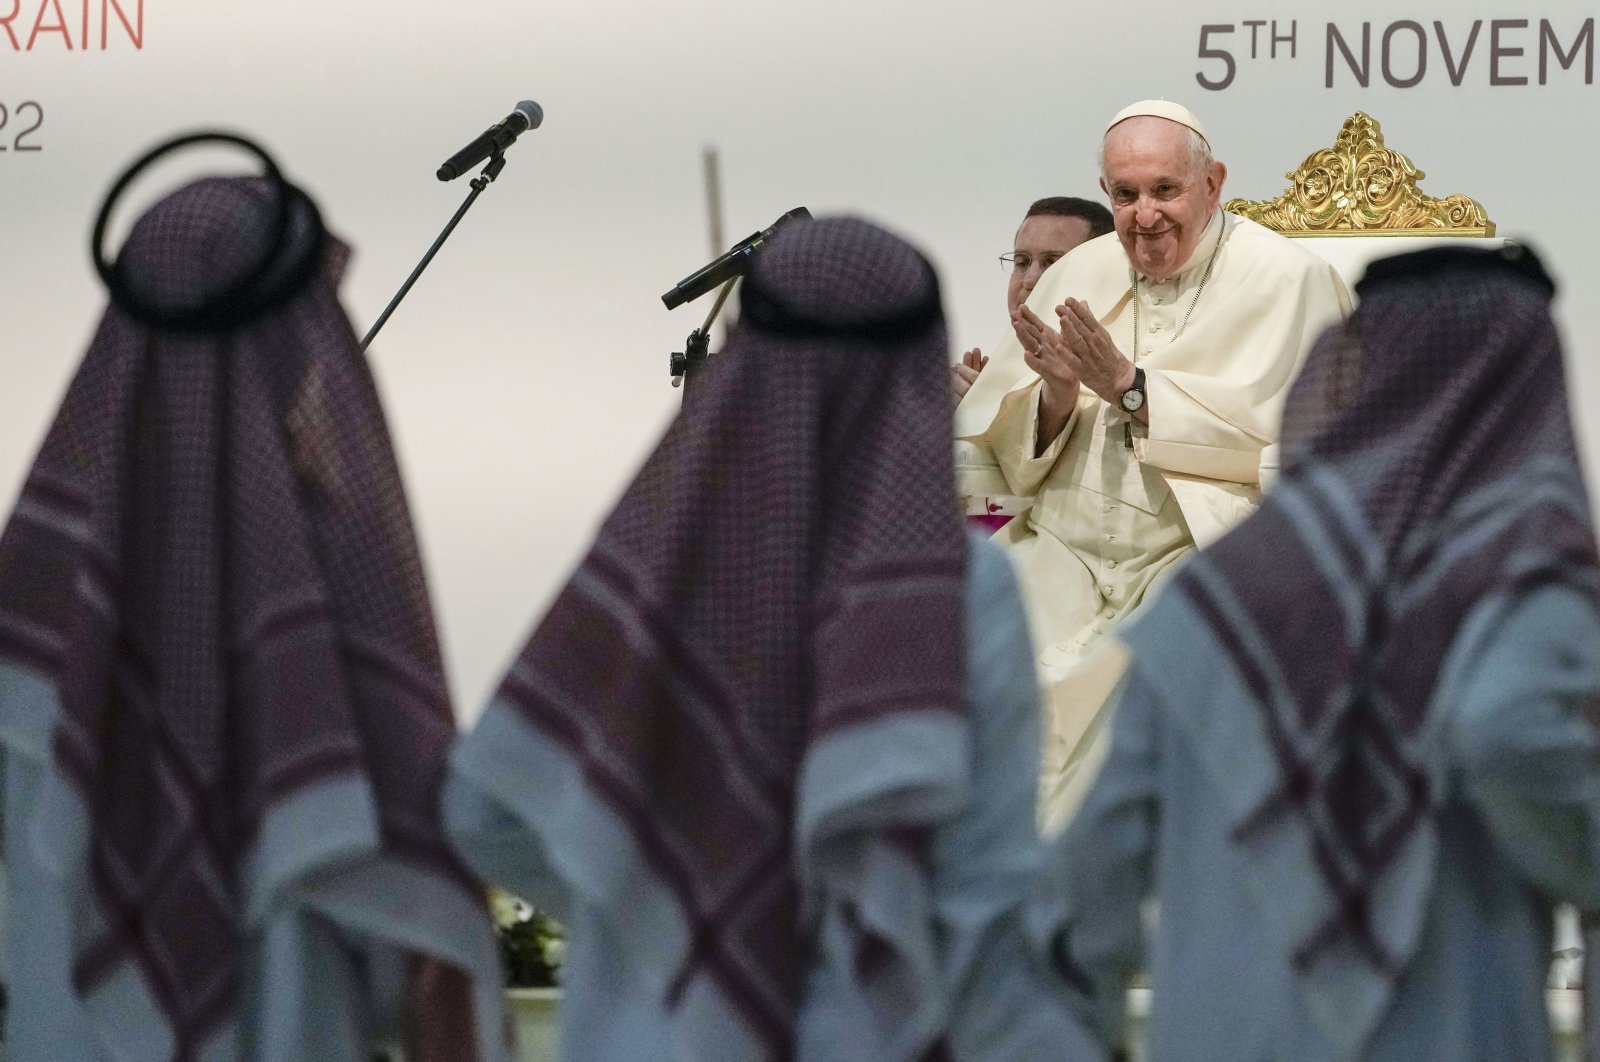 Dancers perform as Pope Francis attends a meeting with the youth at the Sacred Heart School in Manama, Bahrain, Nov. 5, 2022. (AP Photo)